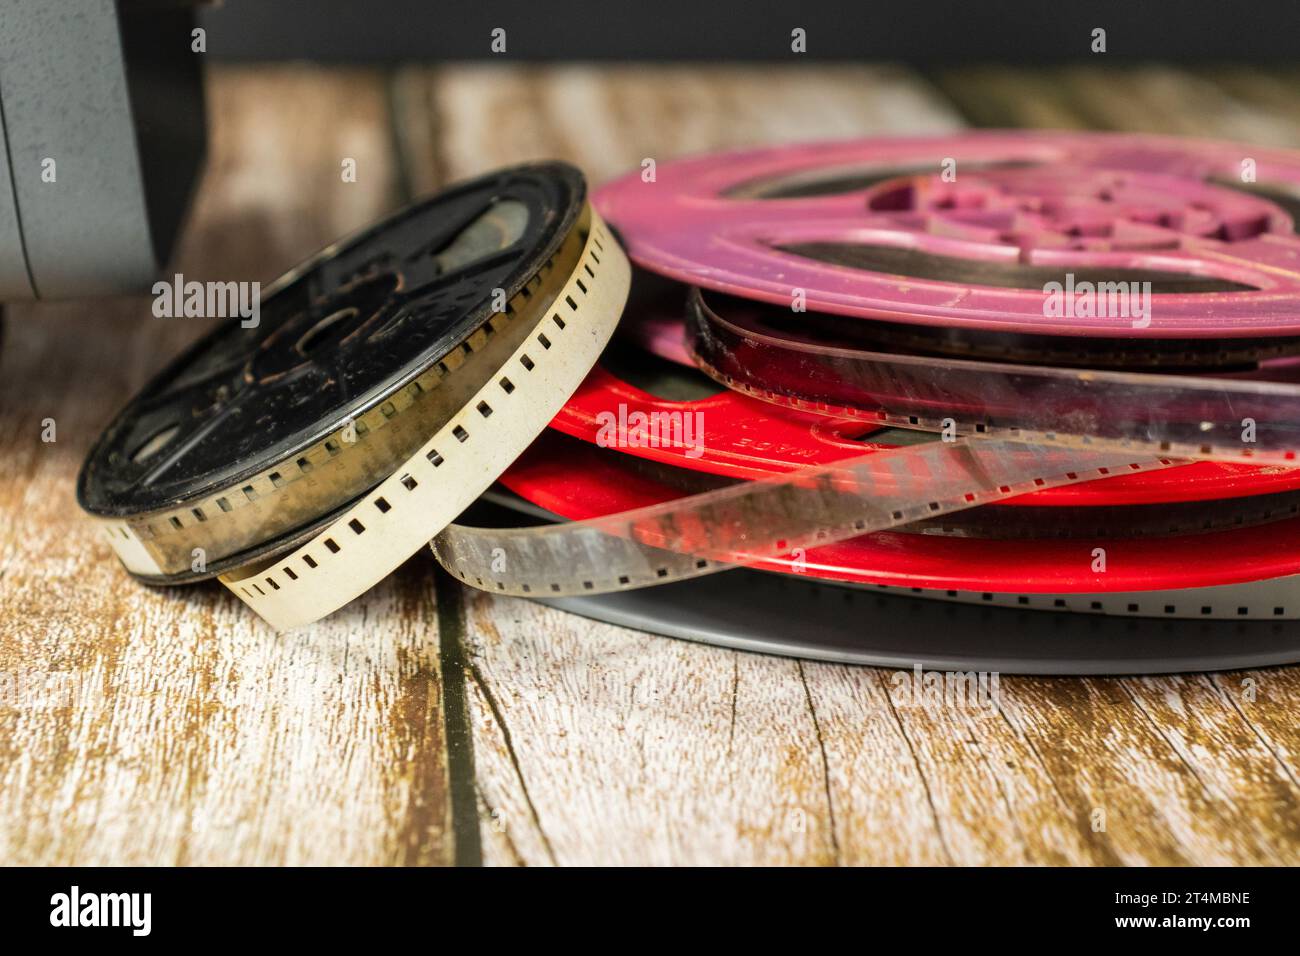 colorful rolls of old cinema films stacked Stock Photo